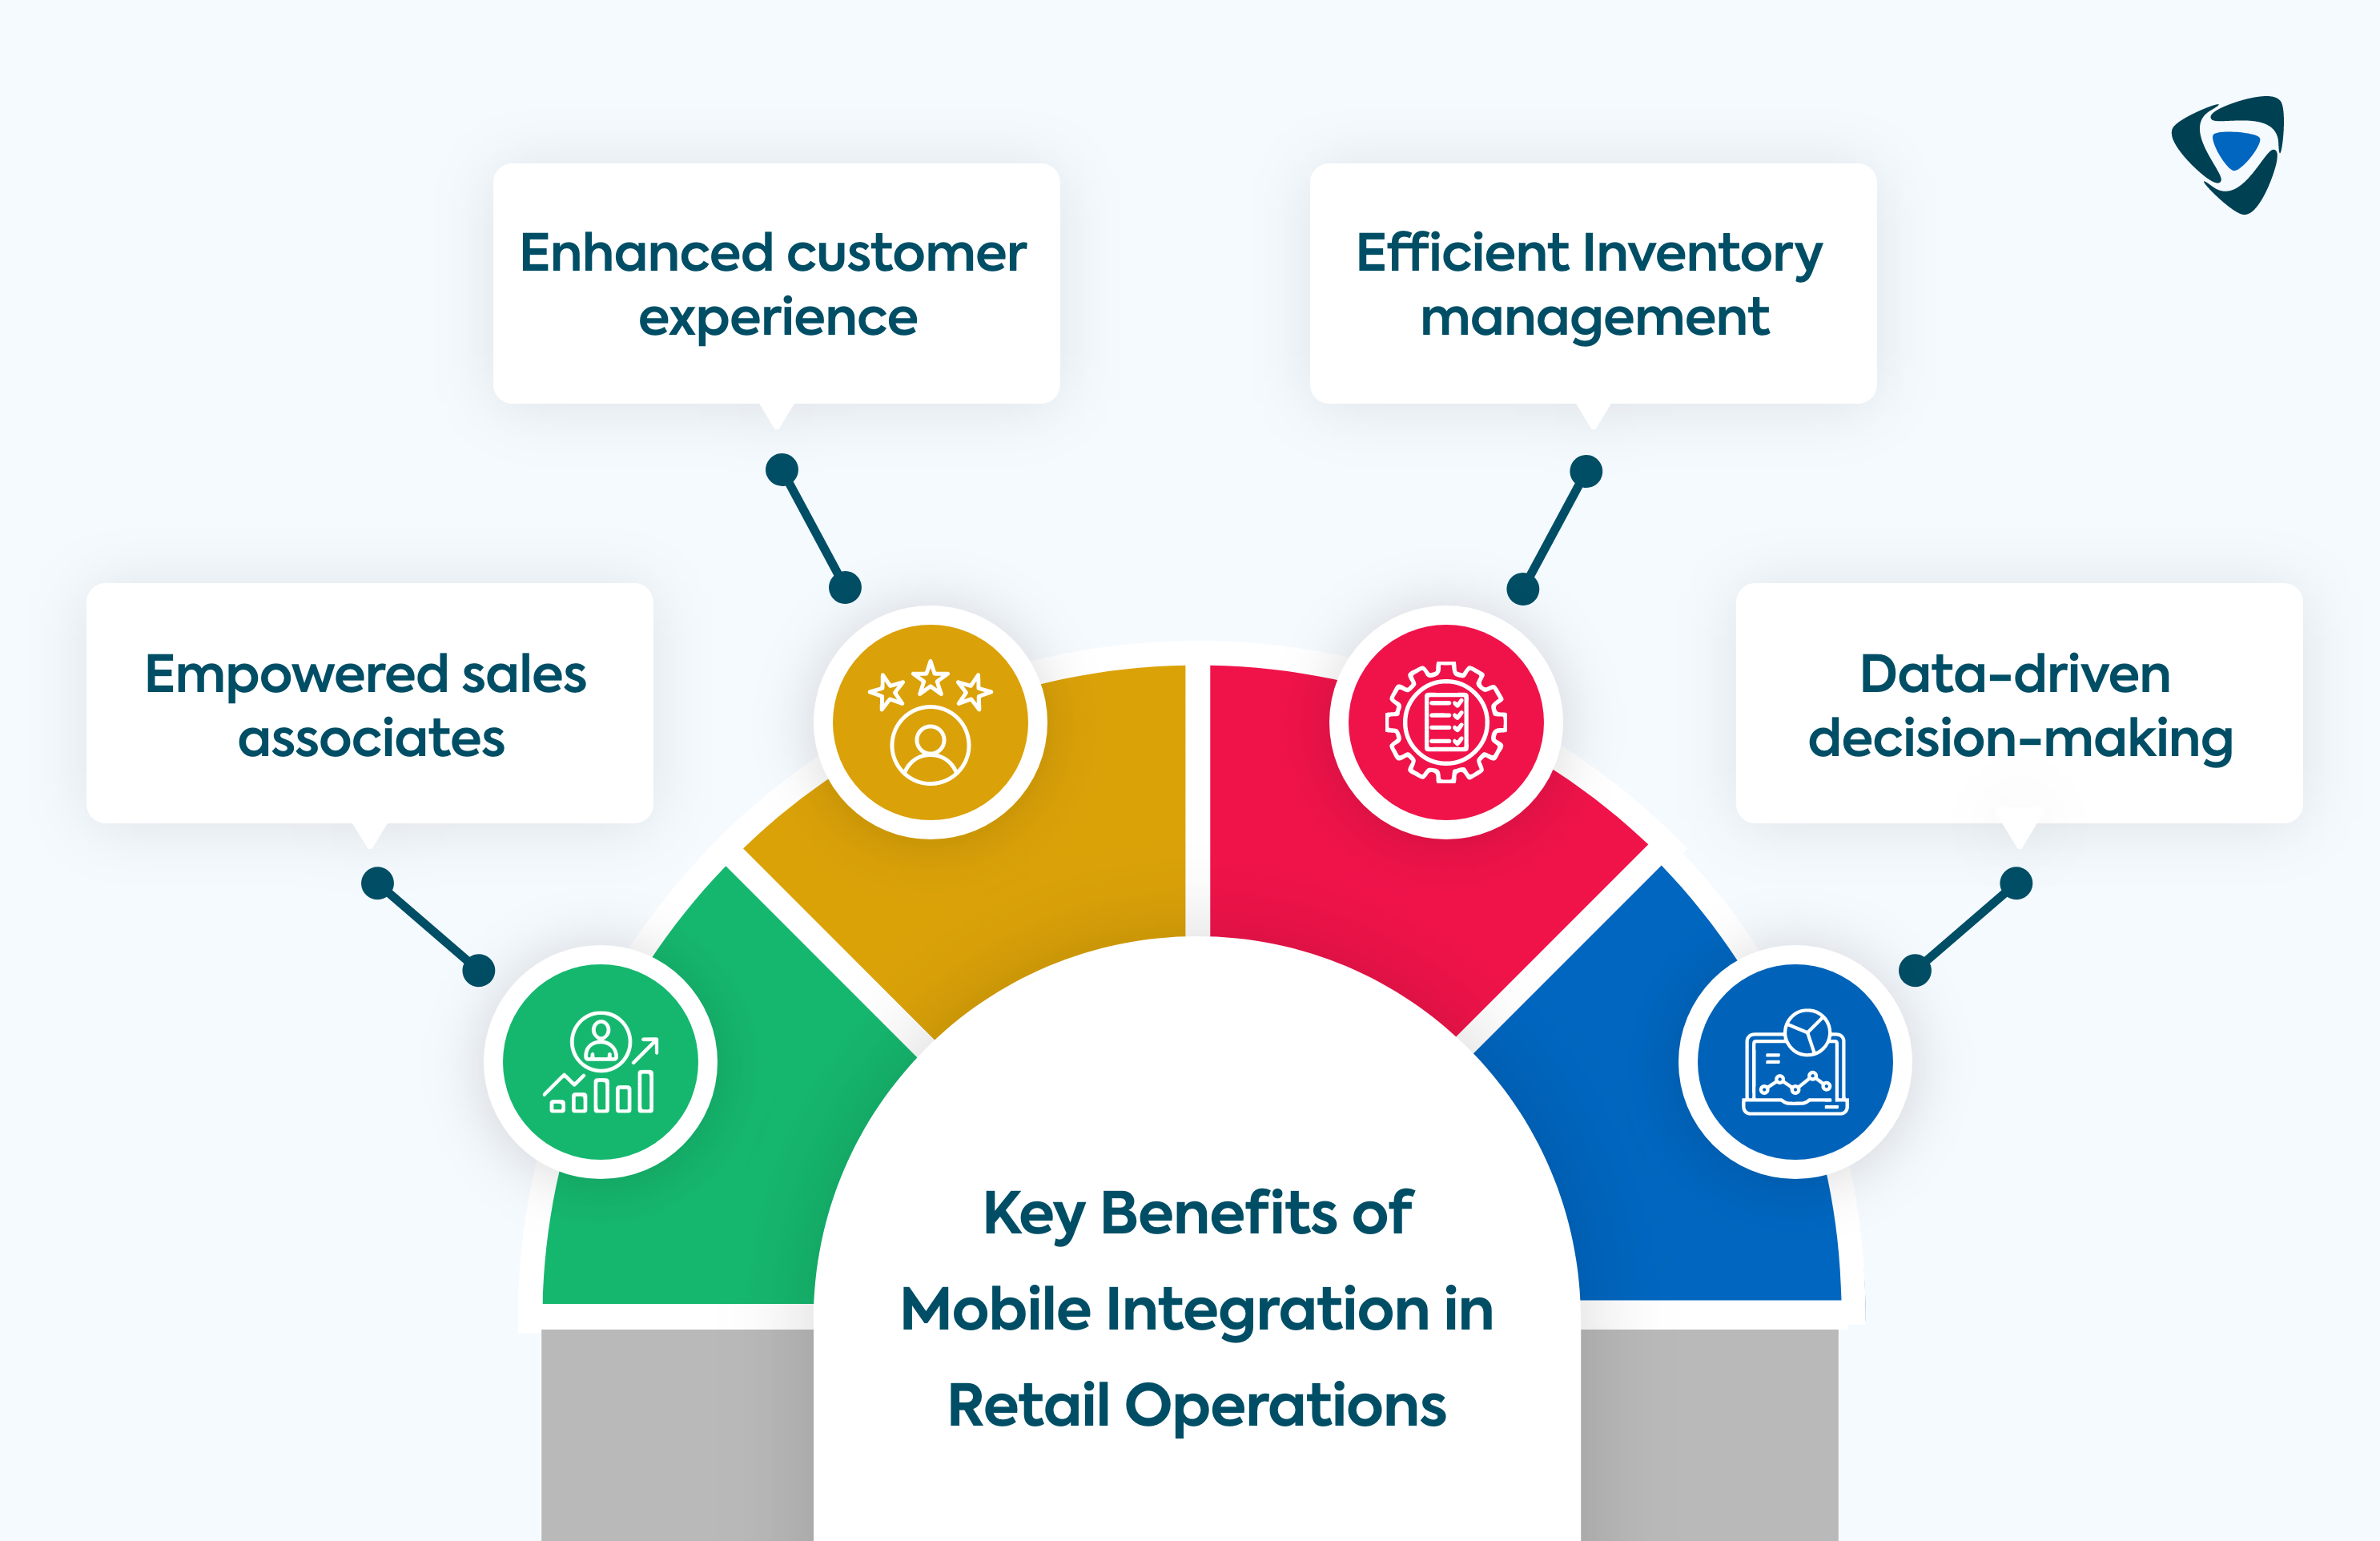 Key benefits of mobile integration in retail operations